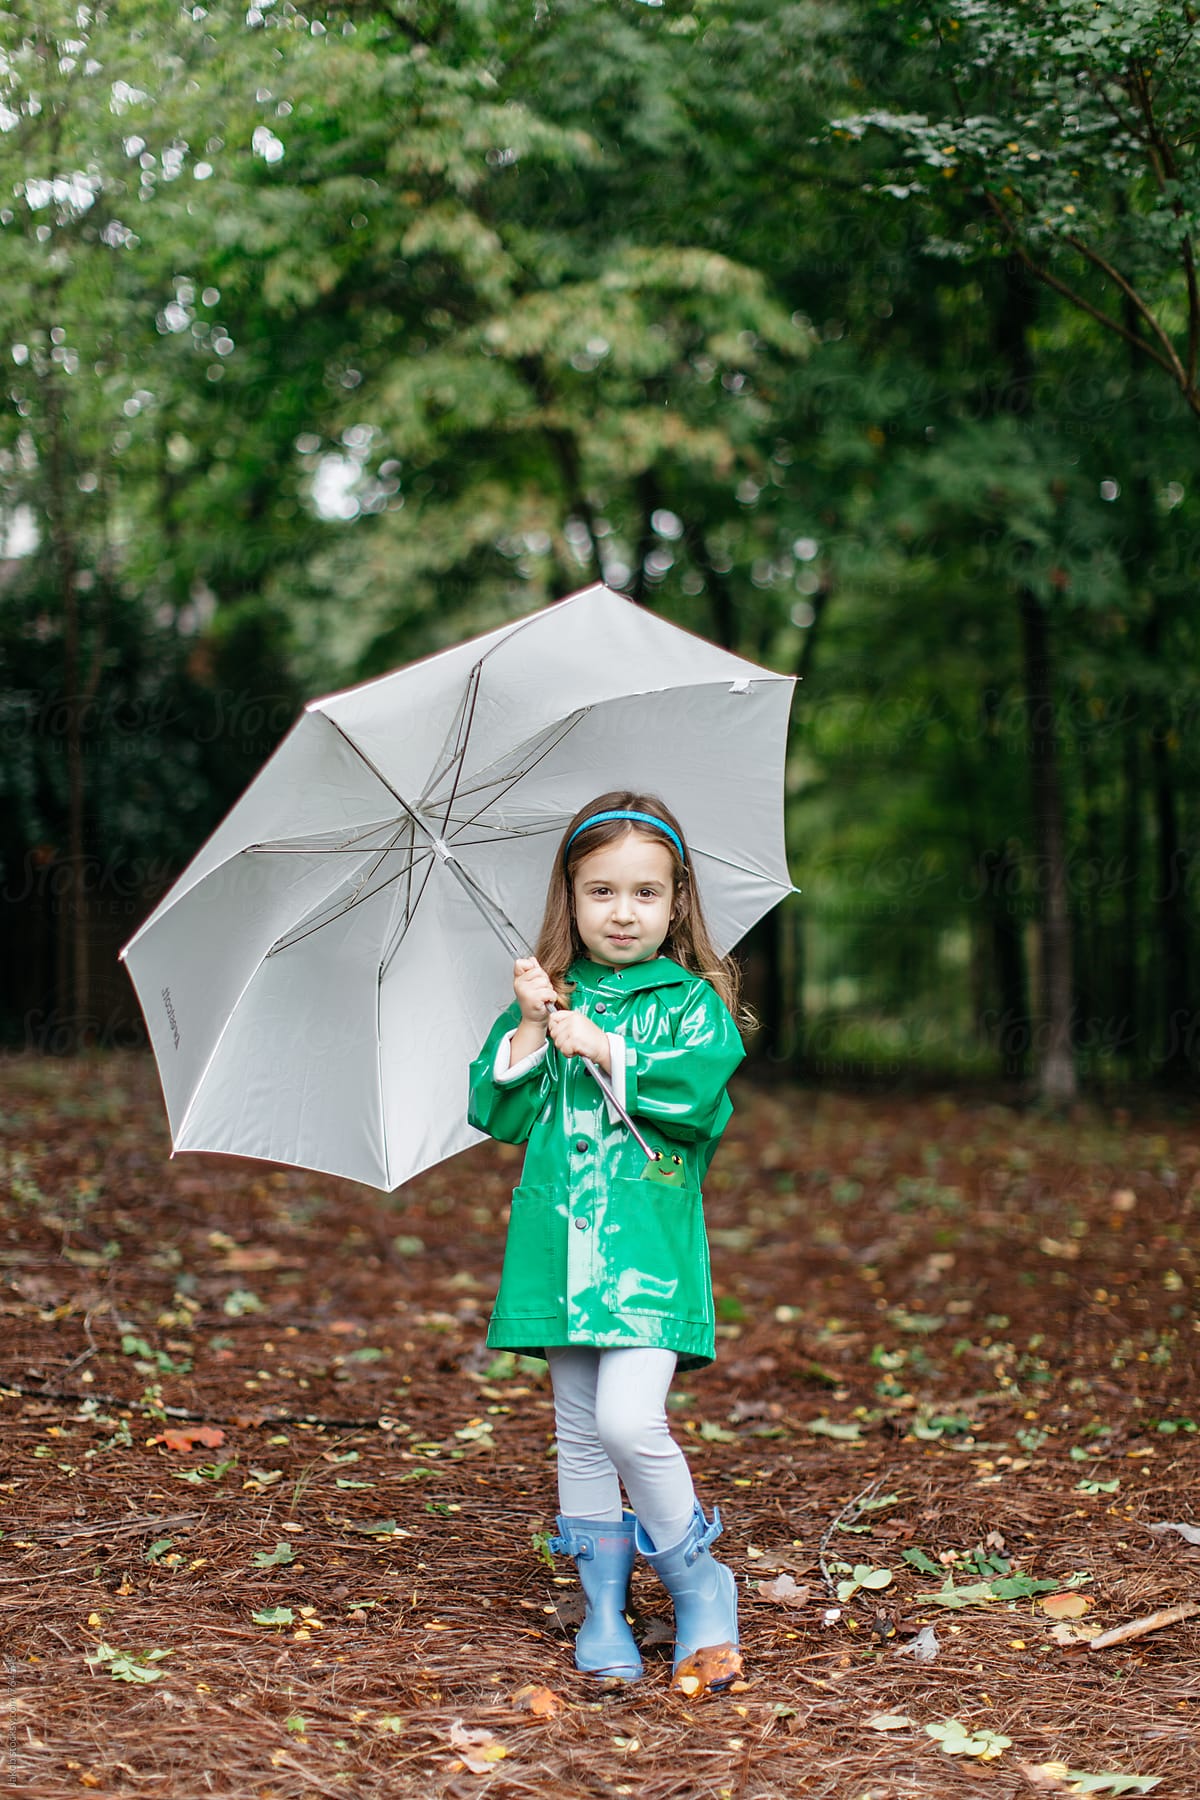 Cute young toddler with an umbrella and raincoat